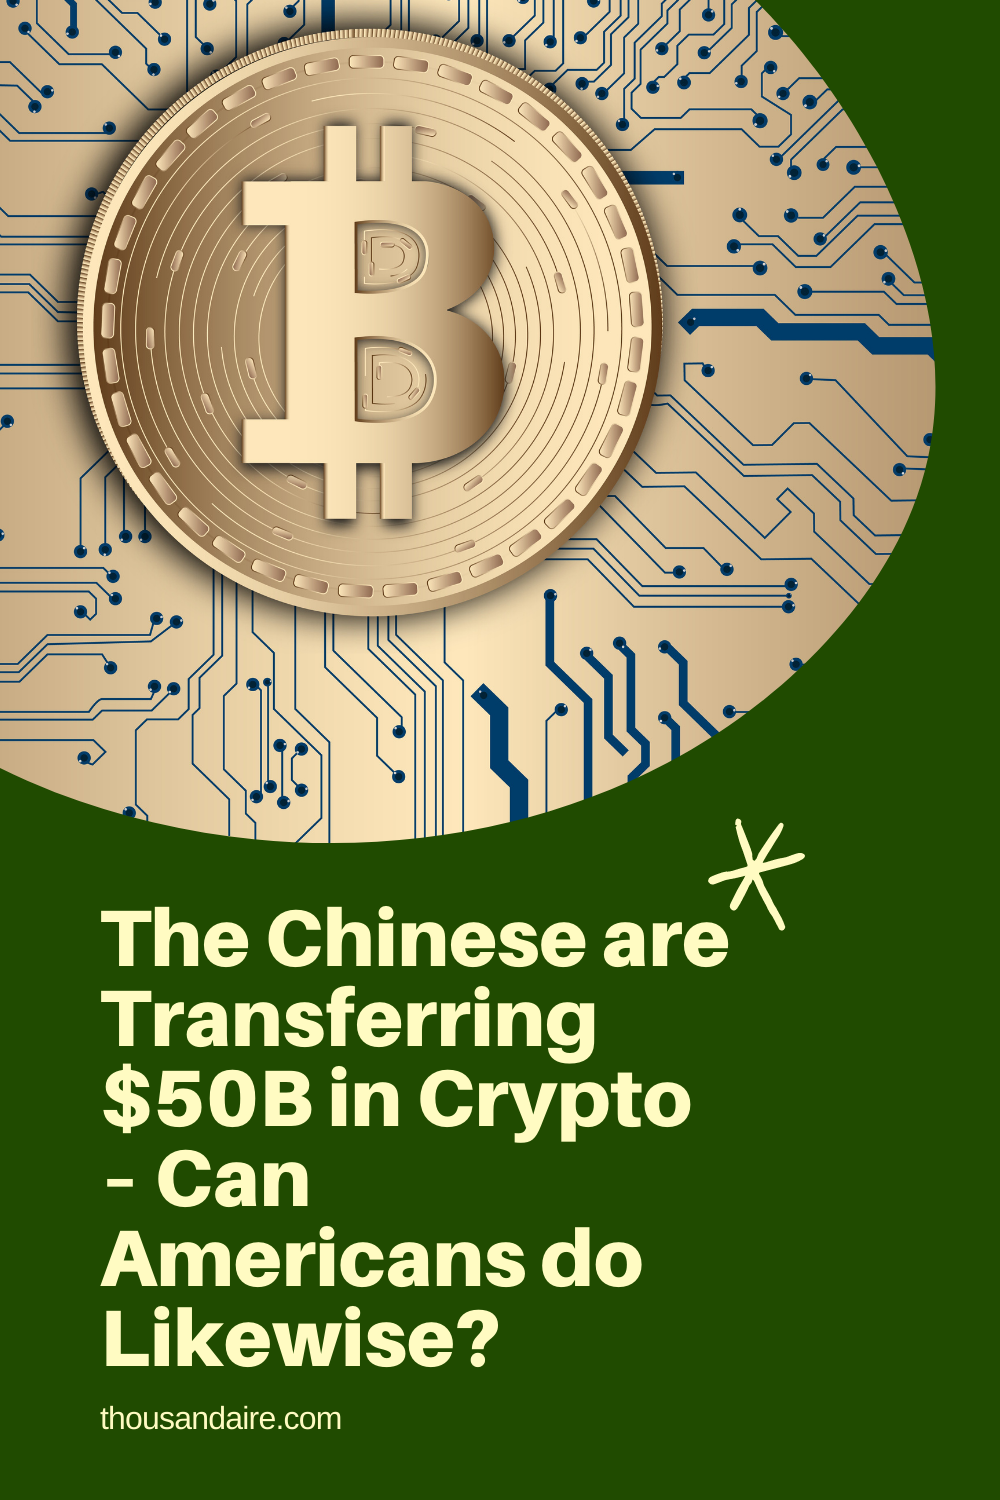 The Chinese are Transferring $50B in Crypto – Can Americans do Likewise